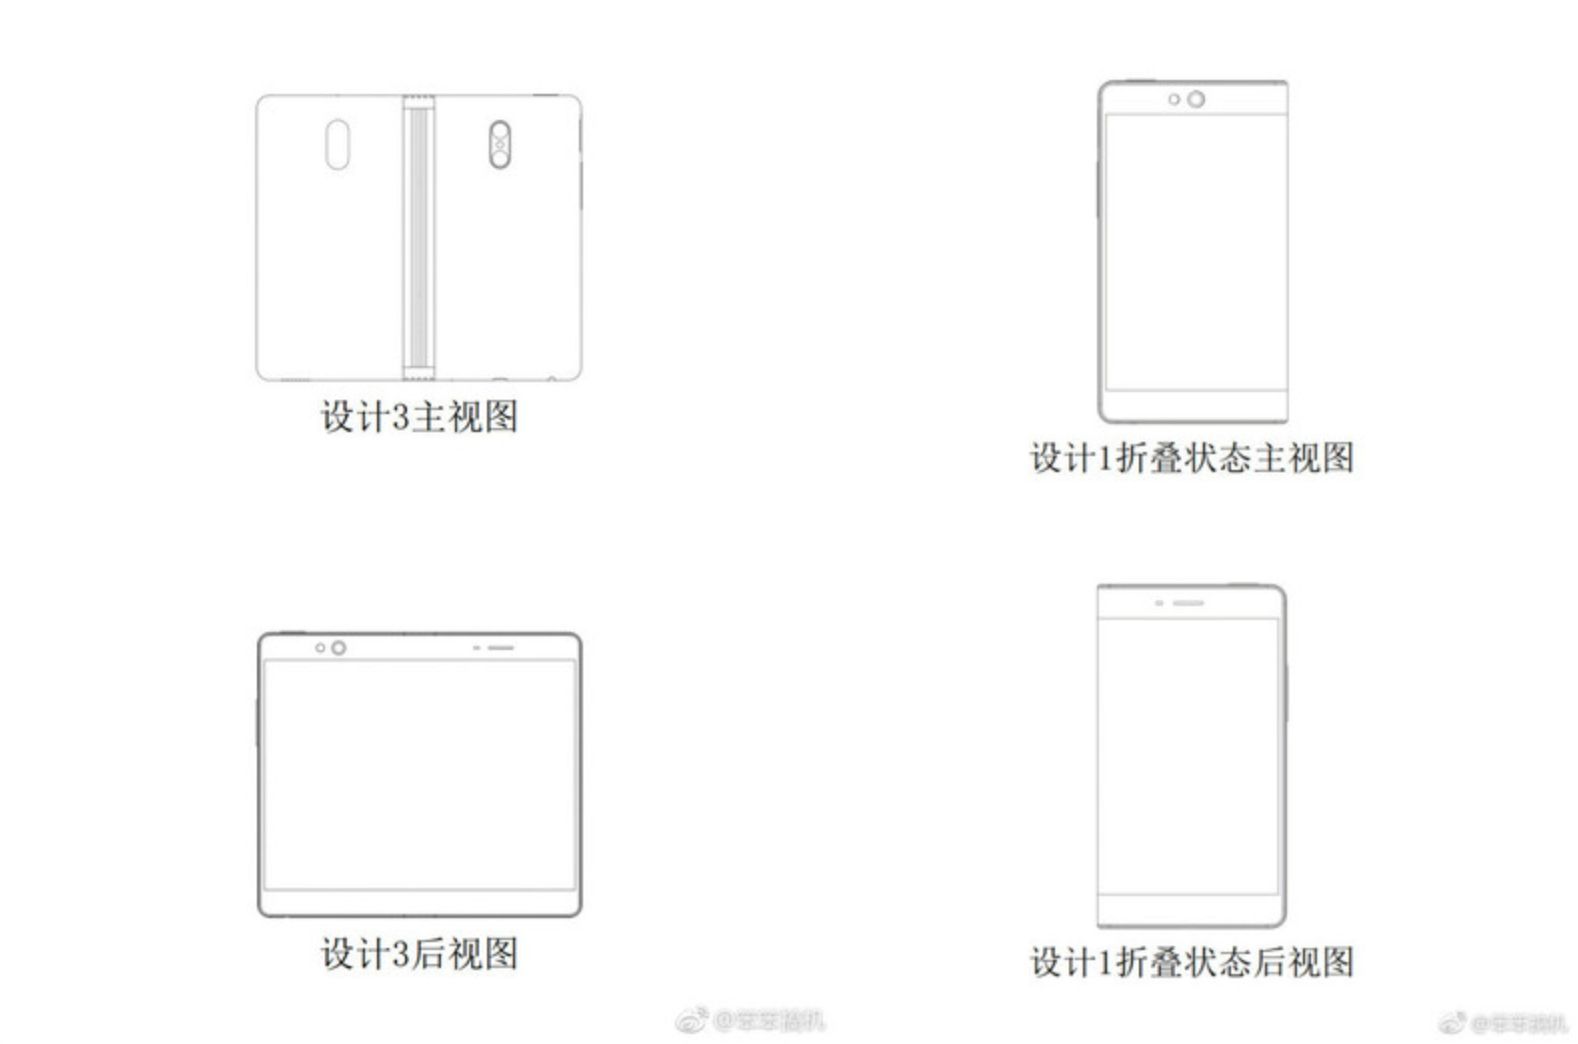 Foldable Smartphone with Single Display patented by Oppo